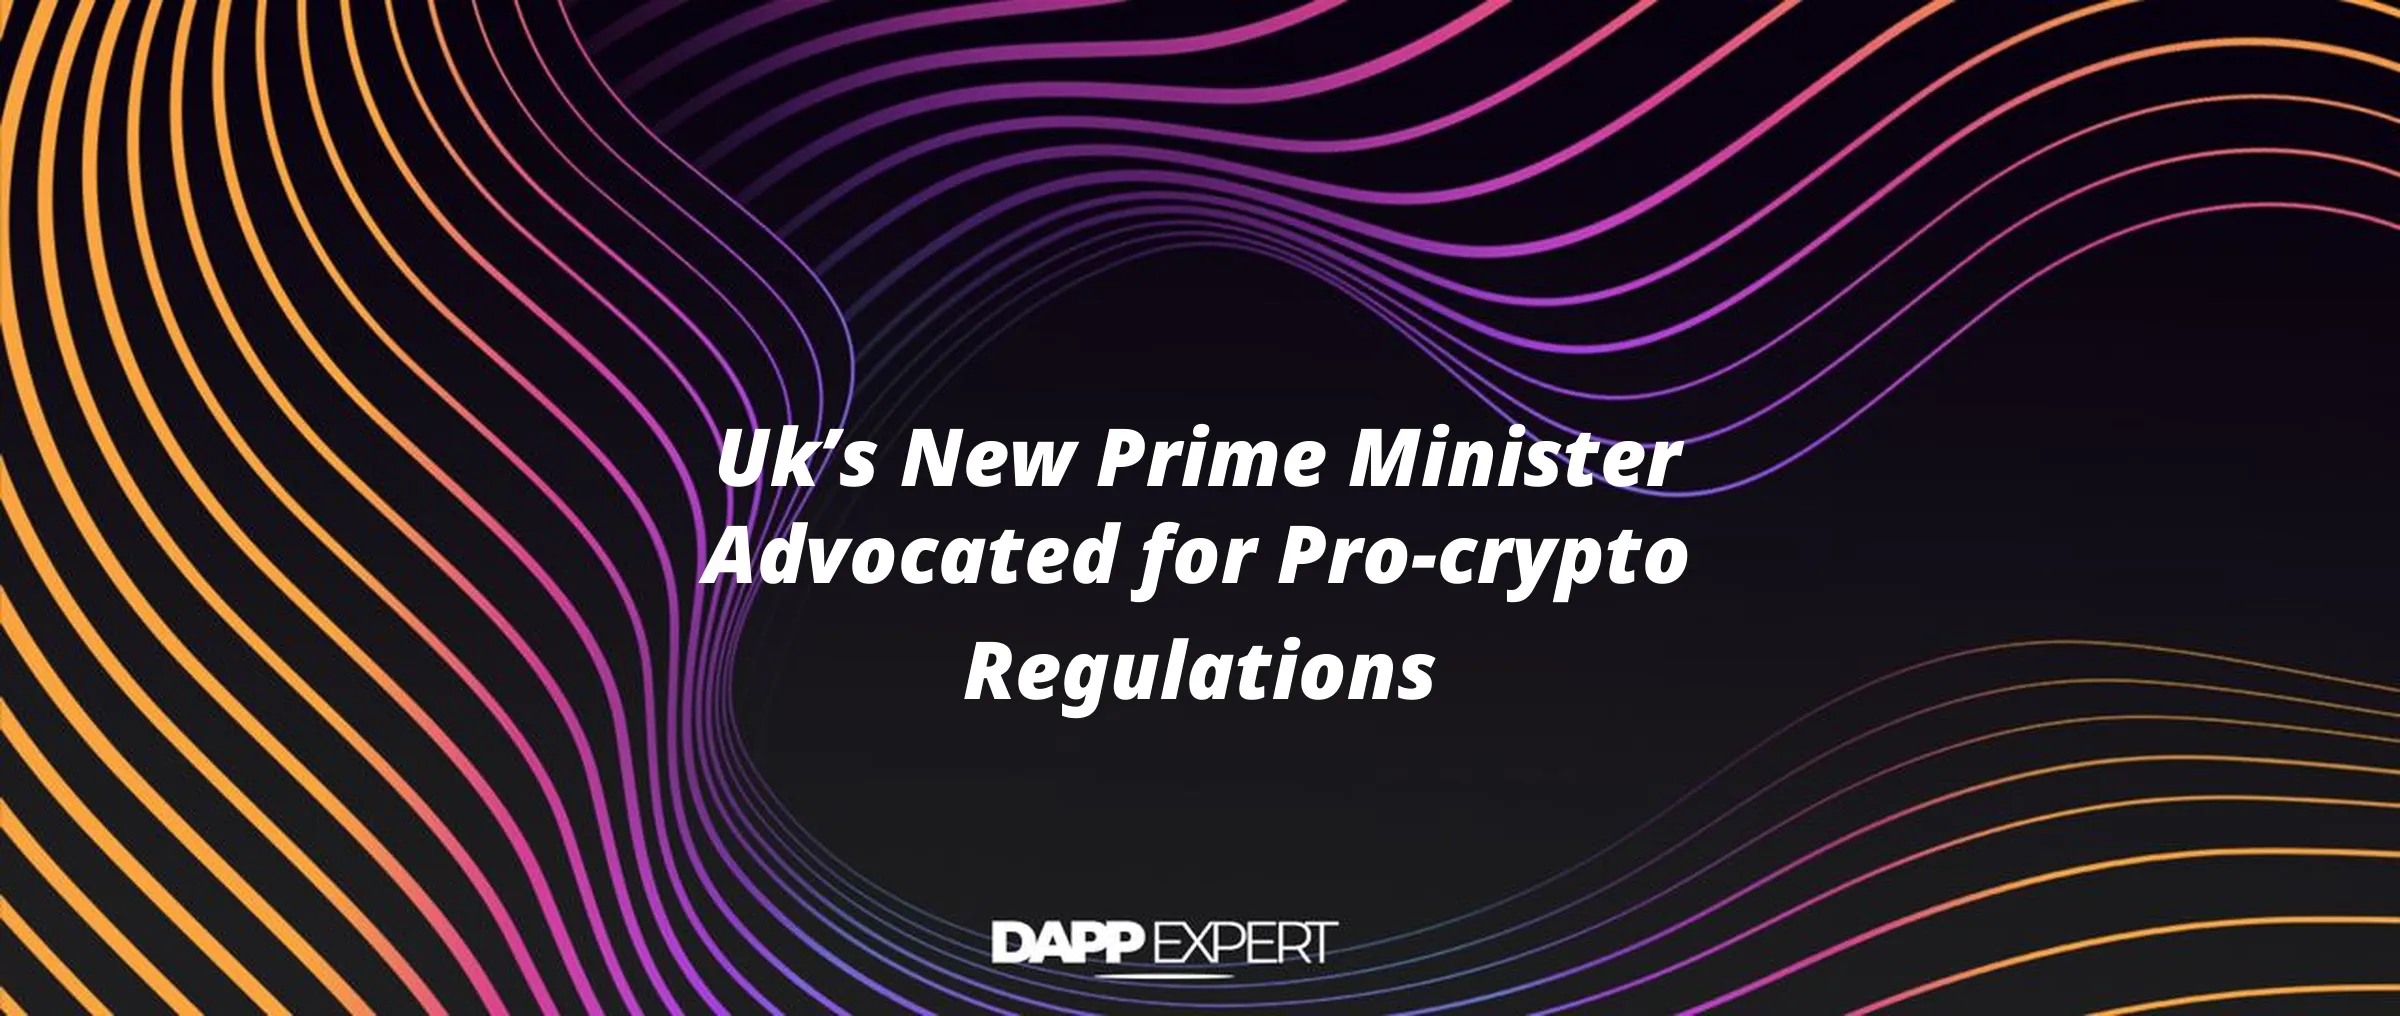 Uk’s New Prime Minister Advocated for Pro-crypto Regulations